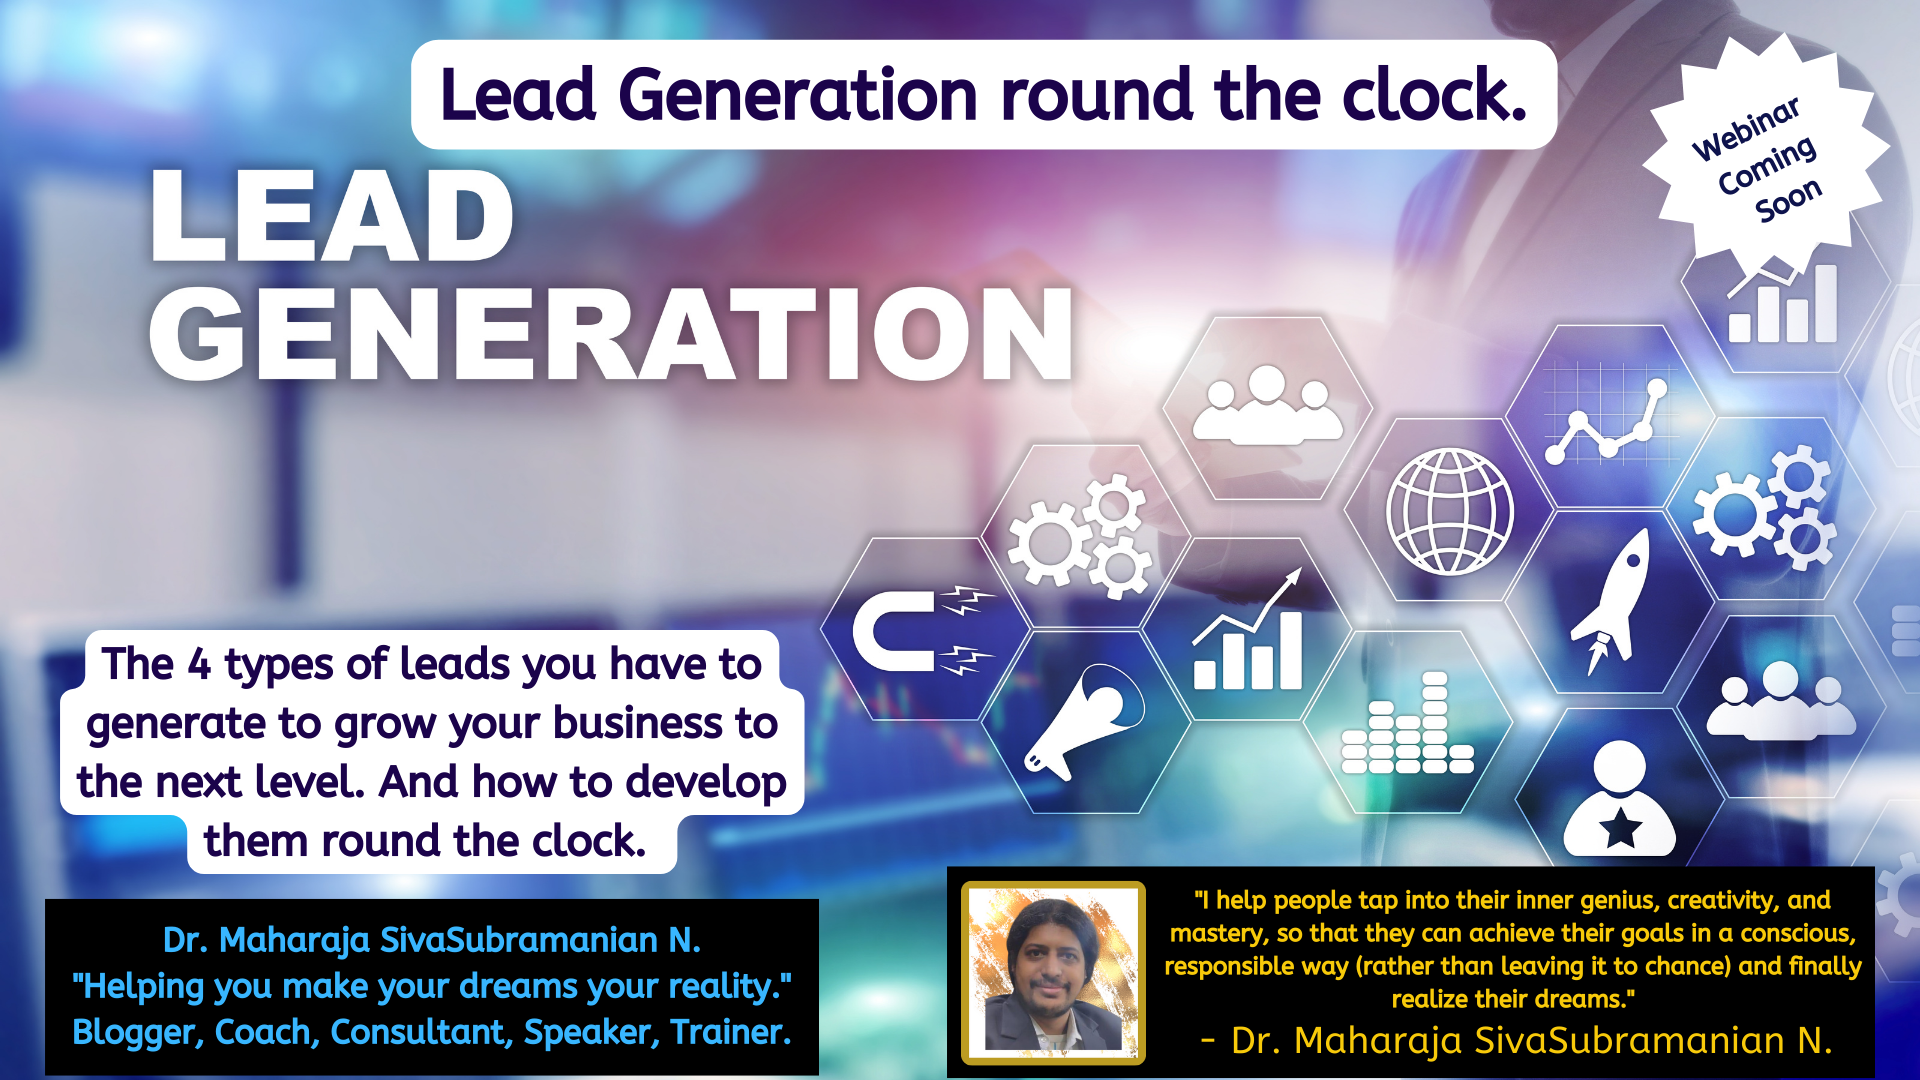 Lead Generation round the clock for Entrepreneurs. – Upcoming free webinar.